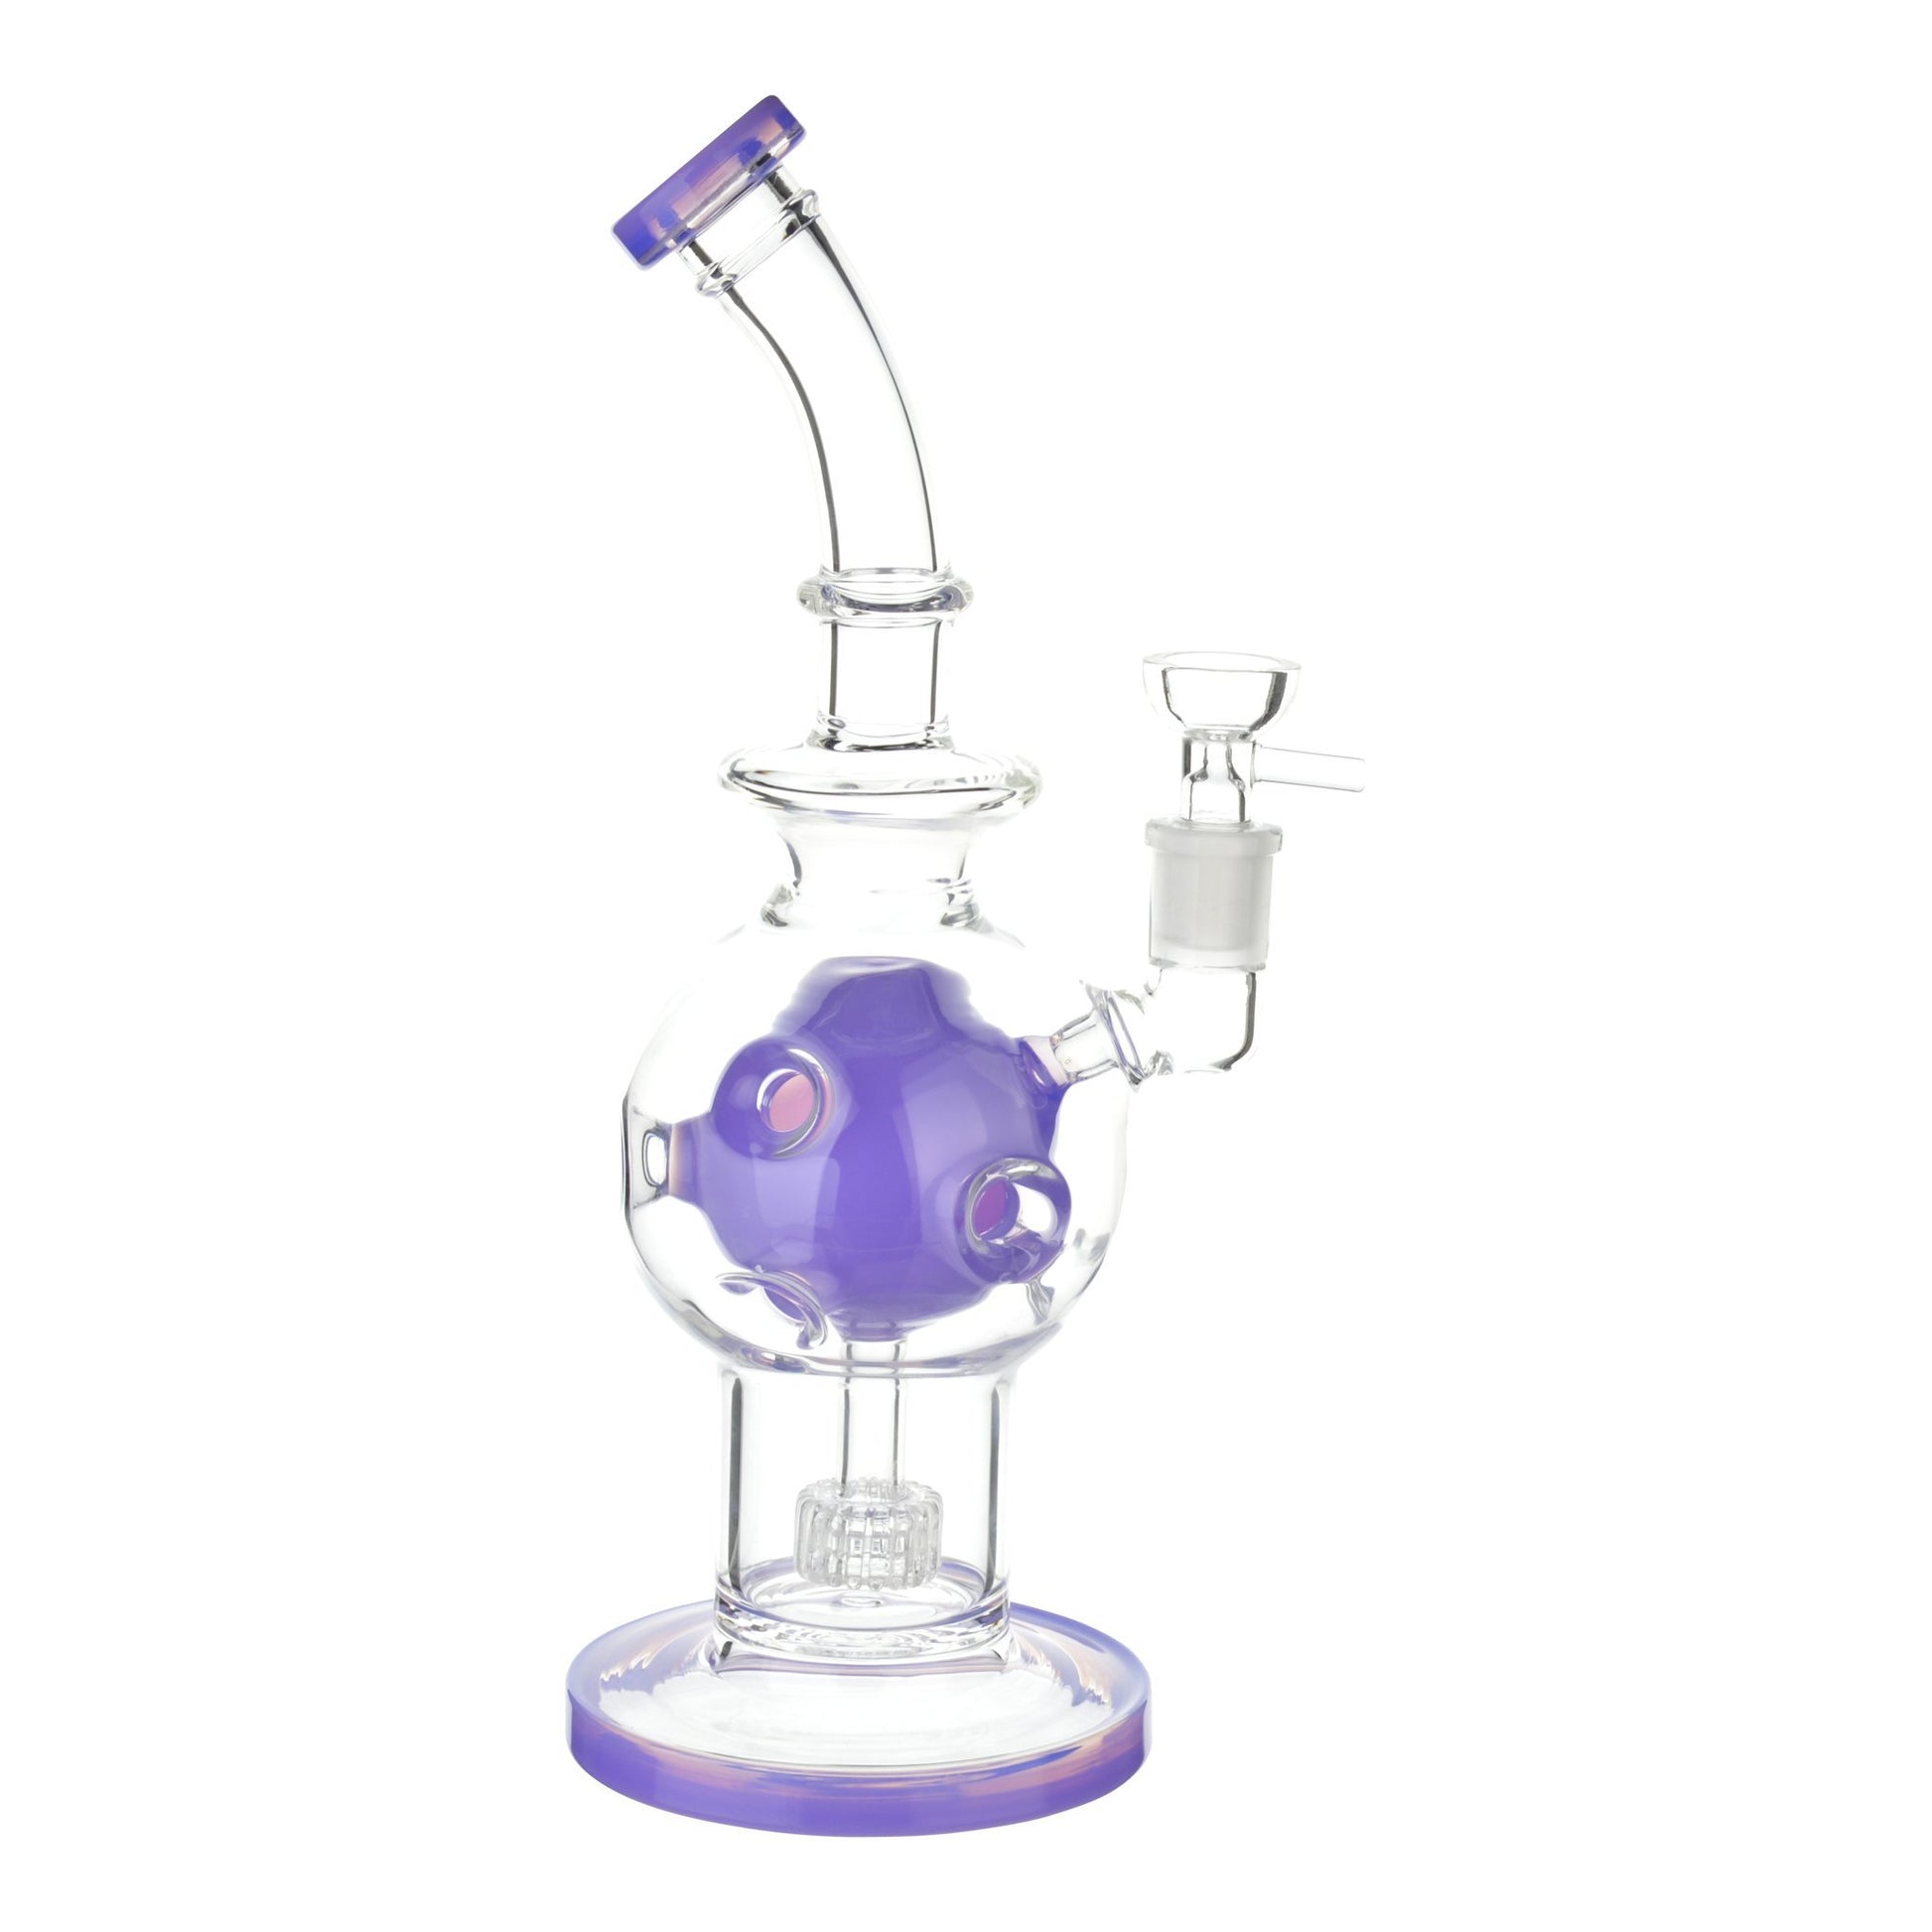 Full body shot of 11-inch clear glass bong smoking device purple accents asteroid round perc mouthpiece tilted left